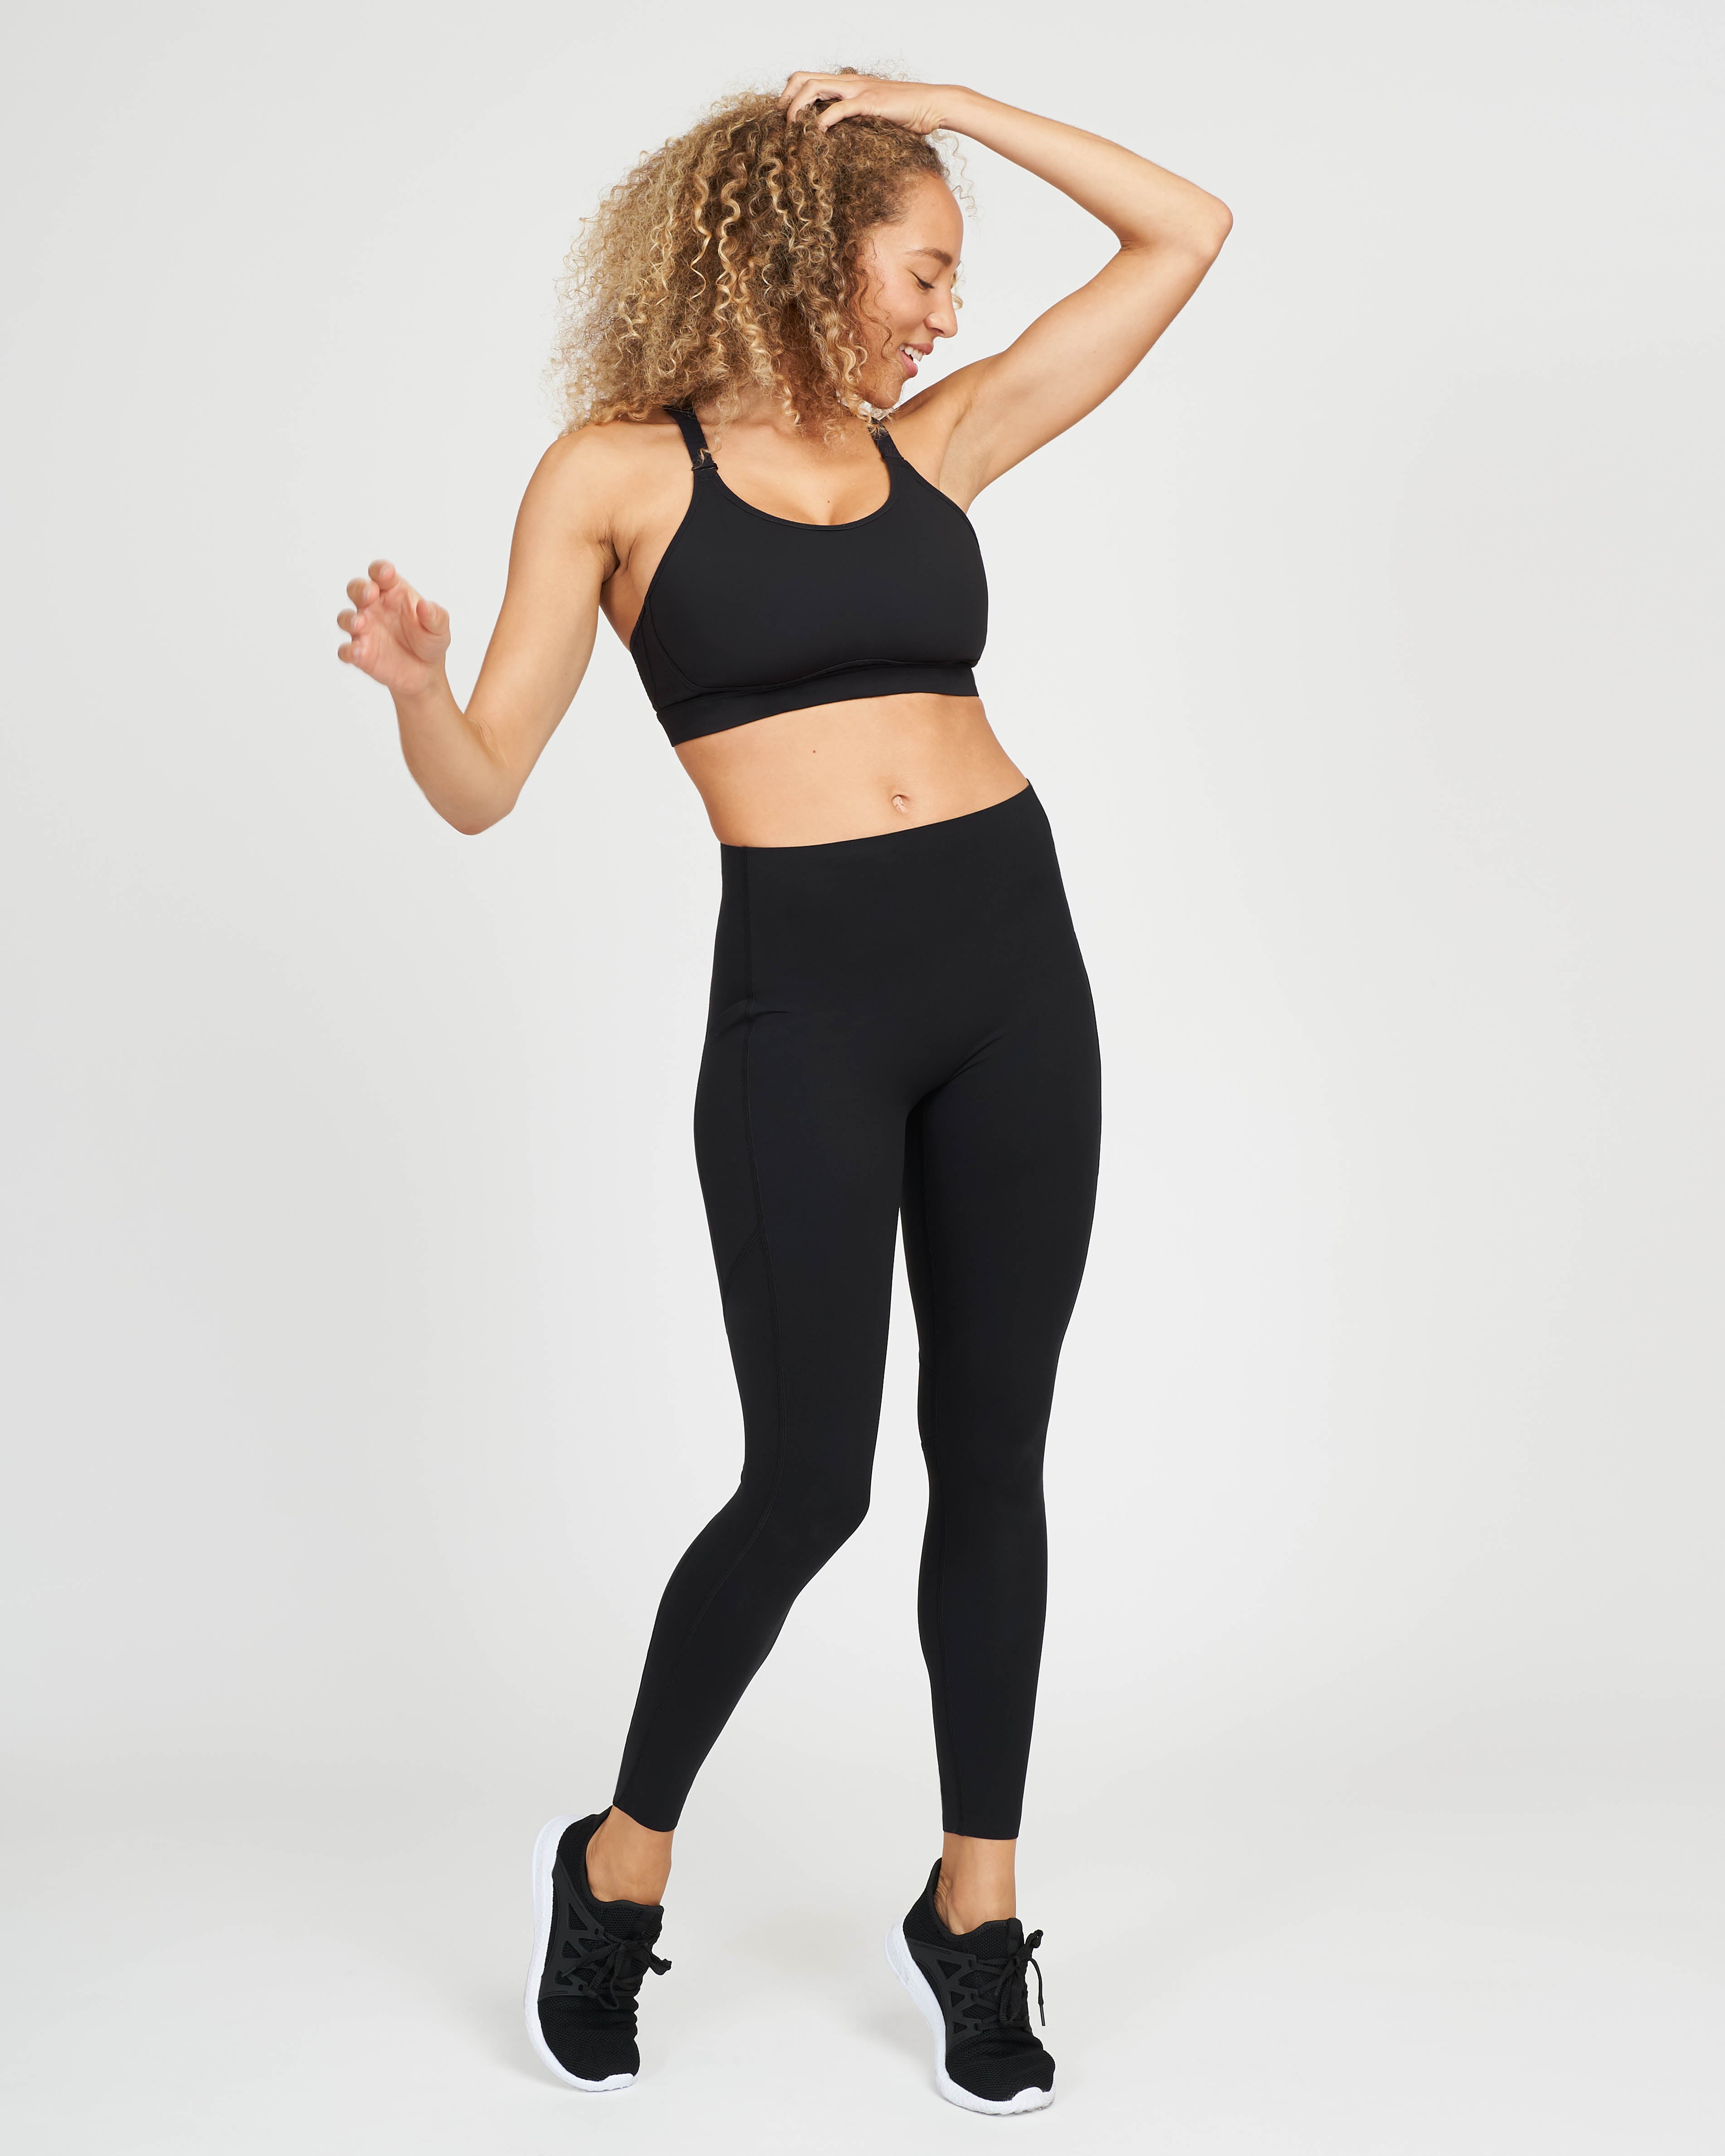 Spanx Is Having a Huge Sale on Its Best-Selling Leggings and Bras